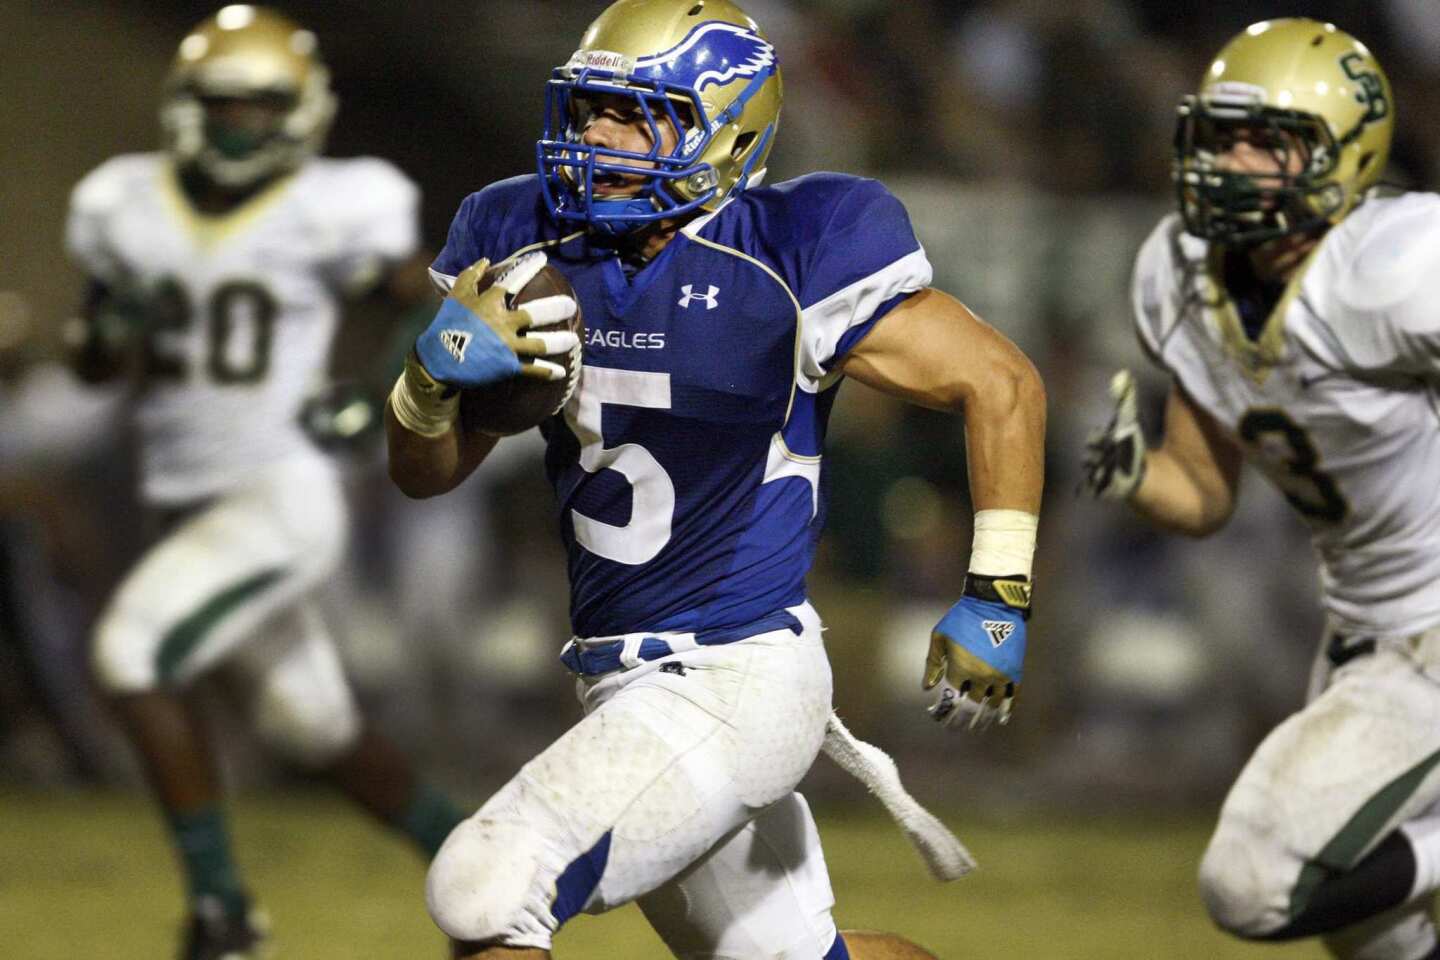 Santa Margarita running back Ryan Wolpin, who had 204 yards rushing and three touchdowns, heads toward the end zone against St. Bonaventure for the game-clinching touchdown in the fourth quarter Friday night.